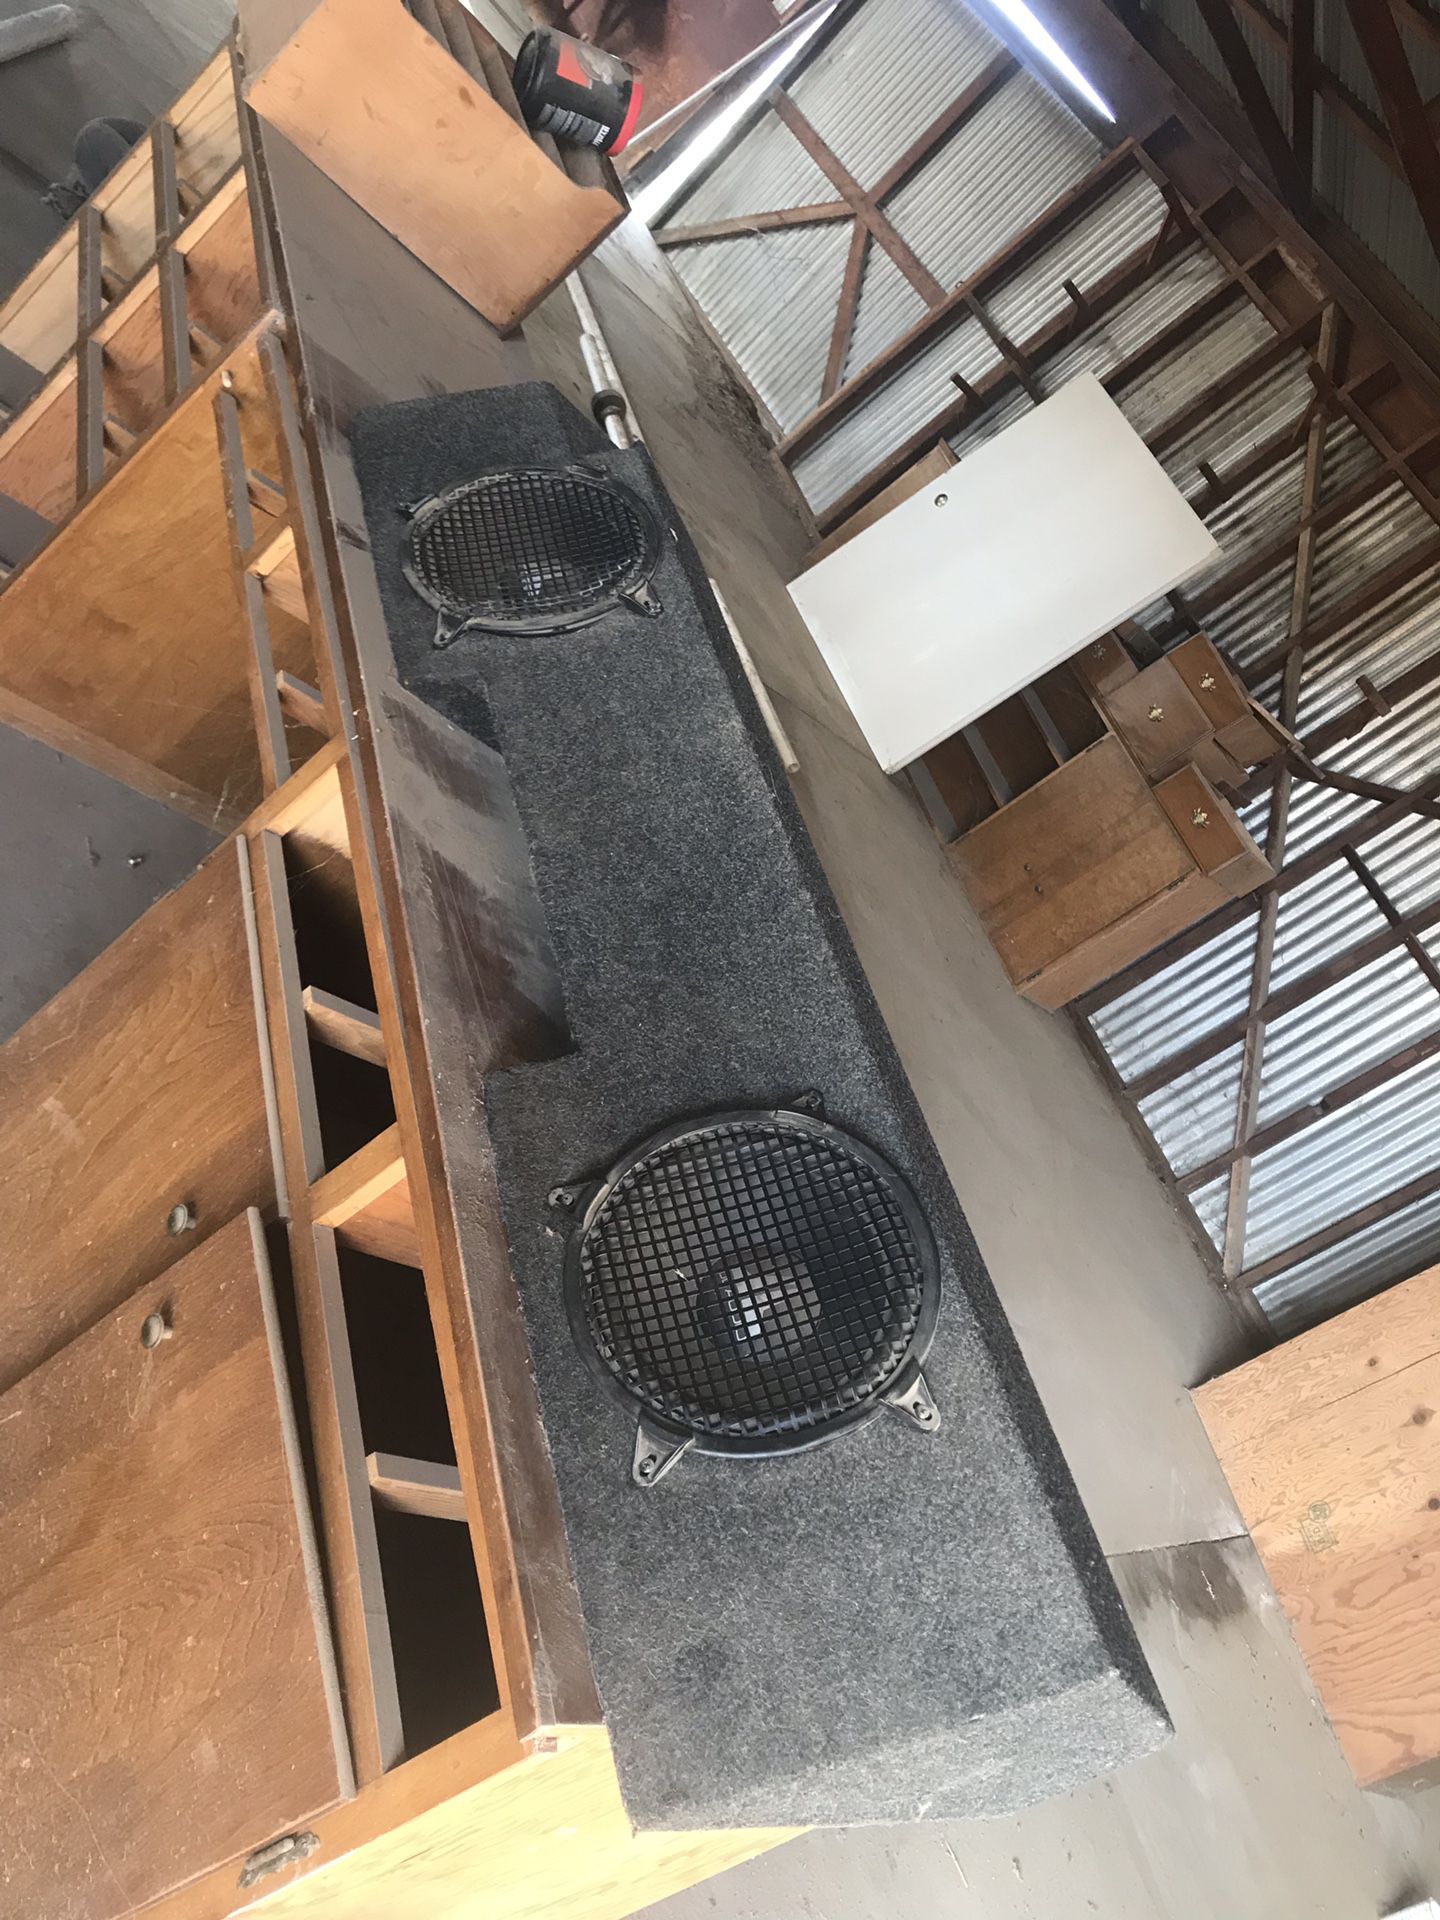 Subwoofers and speaker box